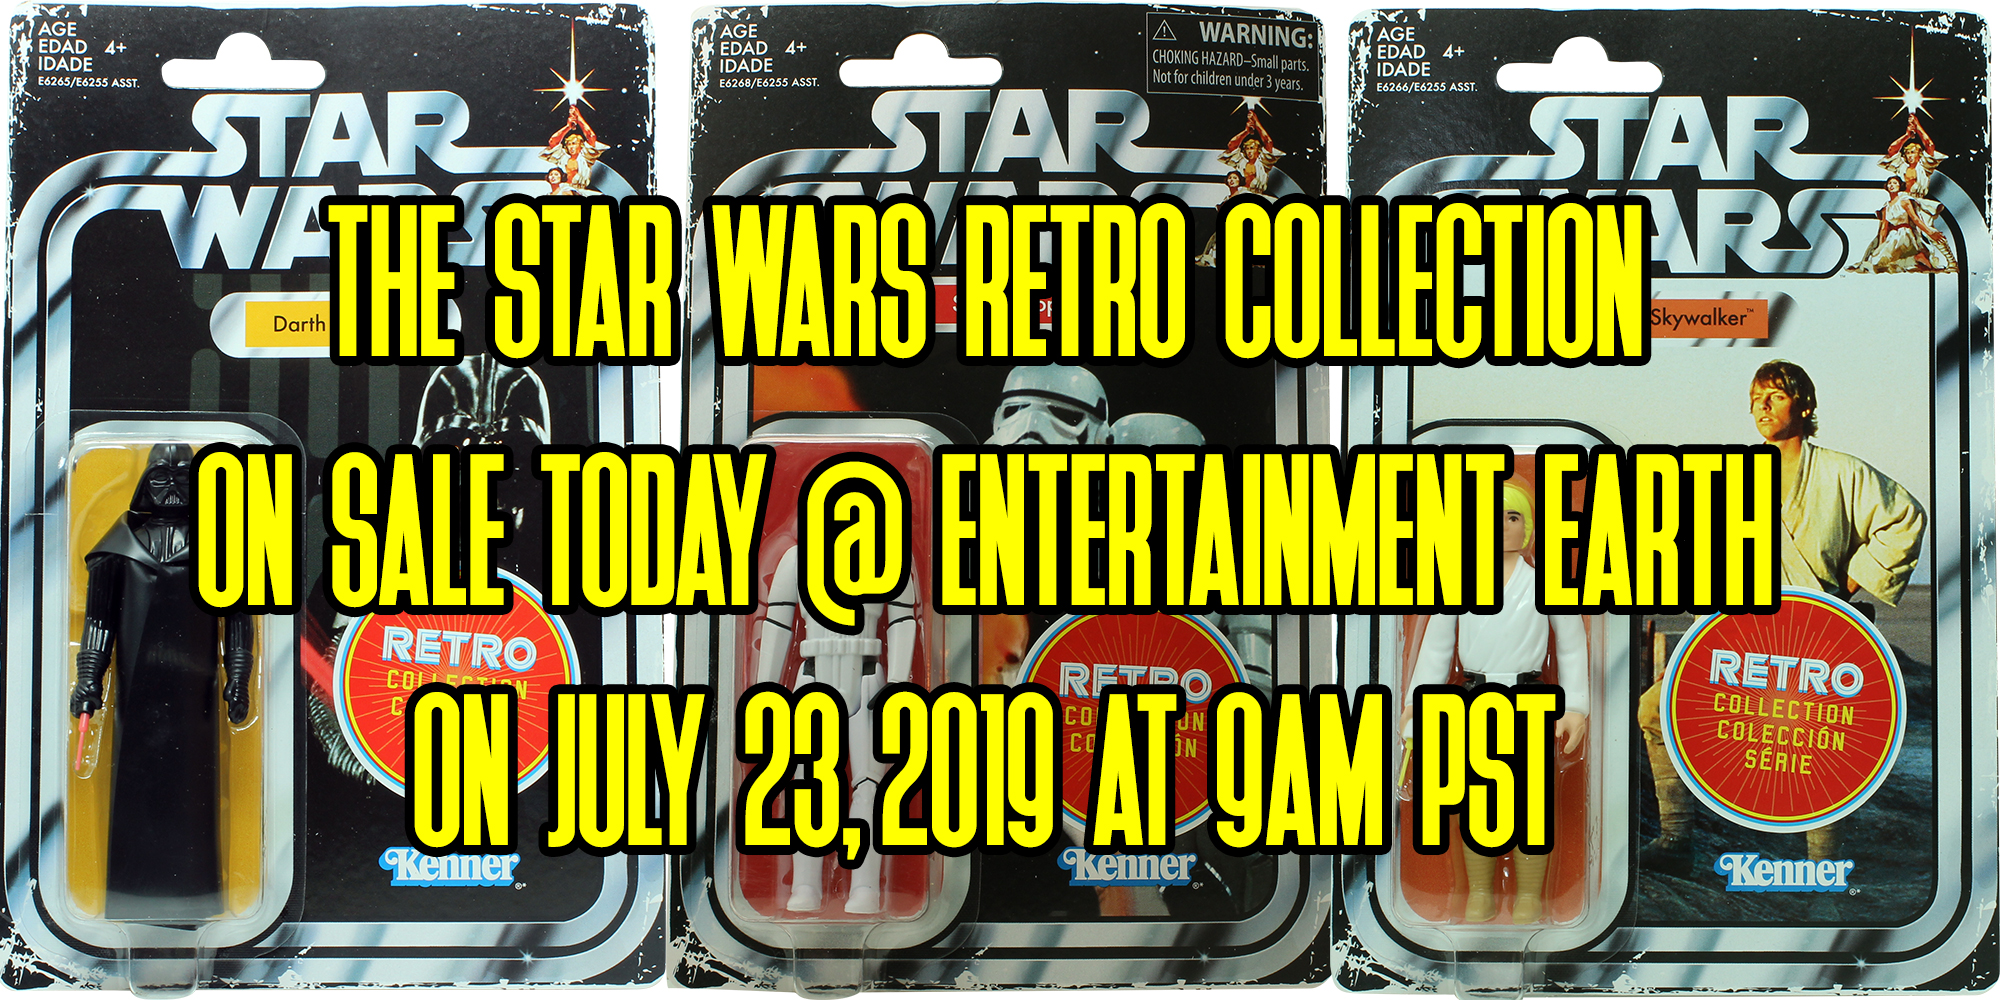 Star Wars The Retro Collection On Sale At EE!